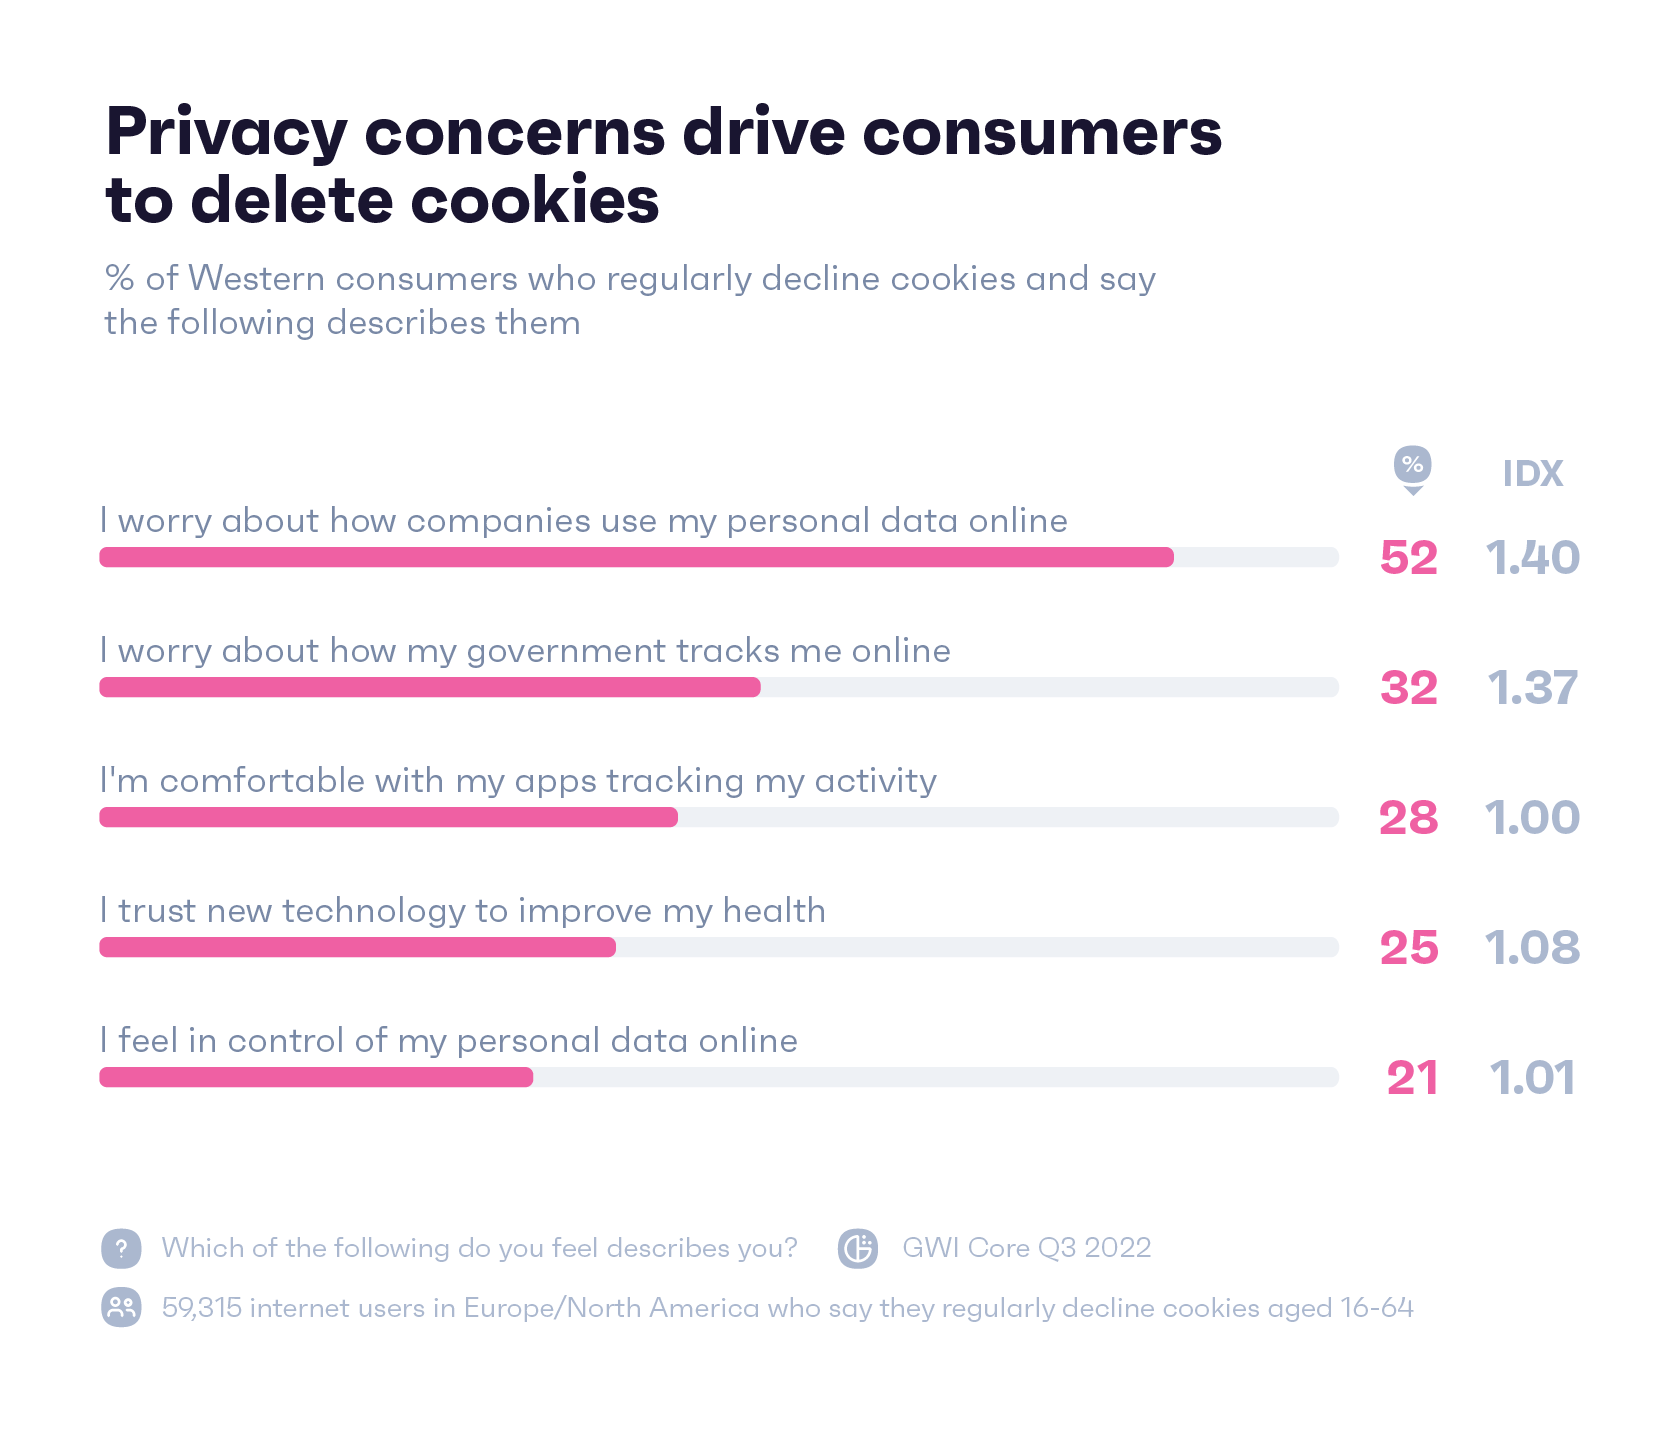 Chart showing how Western consumers who decline cookies regularly would describe themselves